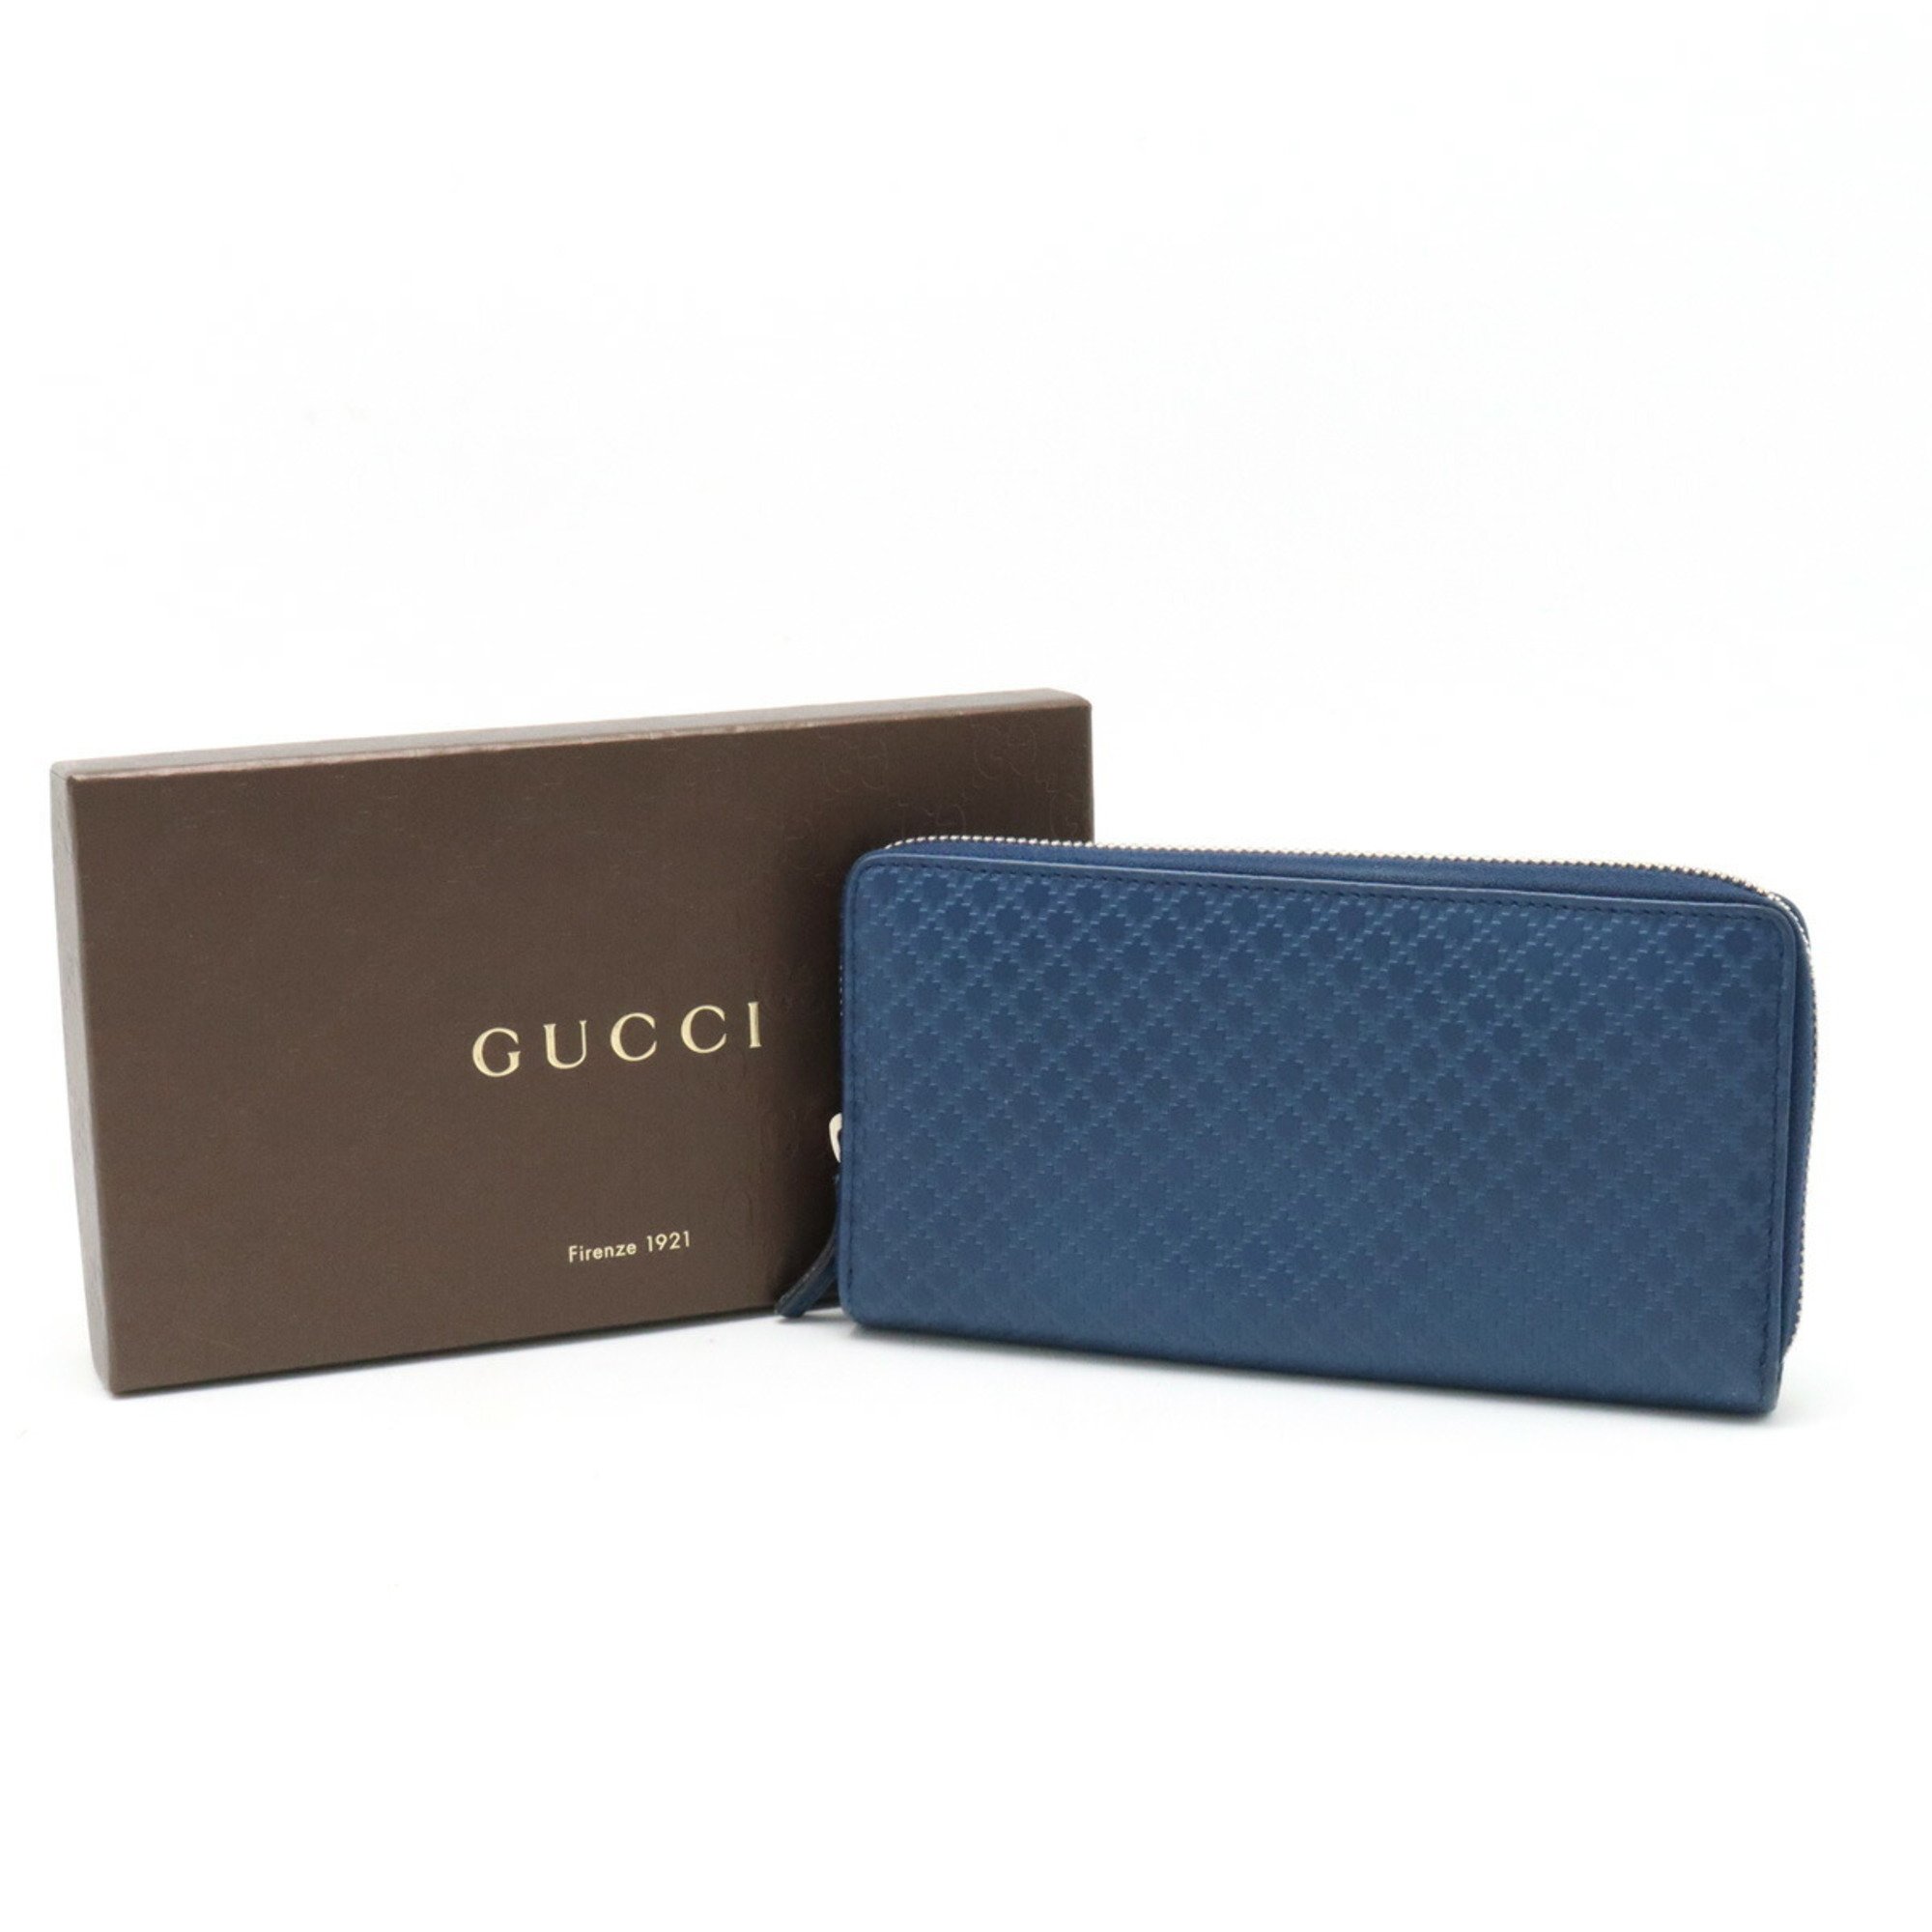 GUCCI Gucci Diamante Round Long Wallet Leather Blue 307990